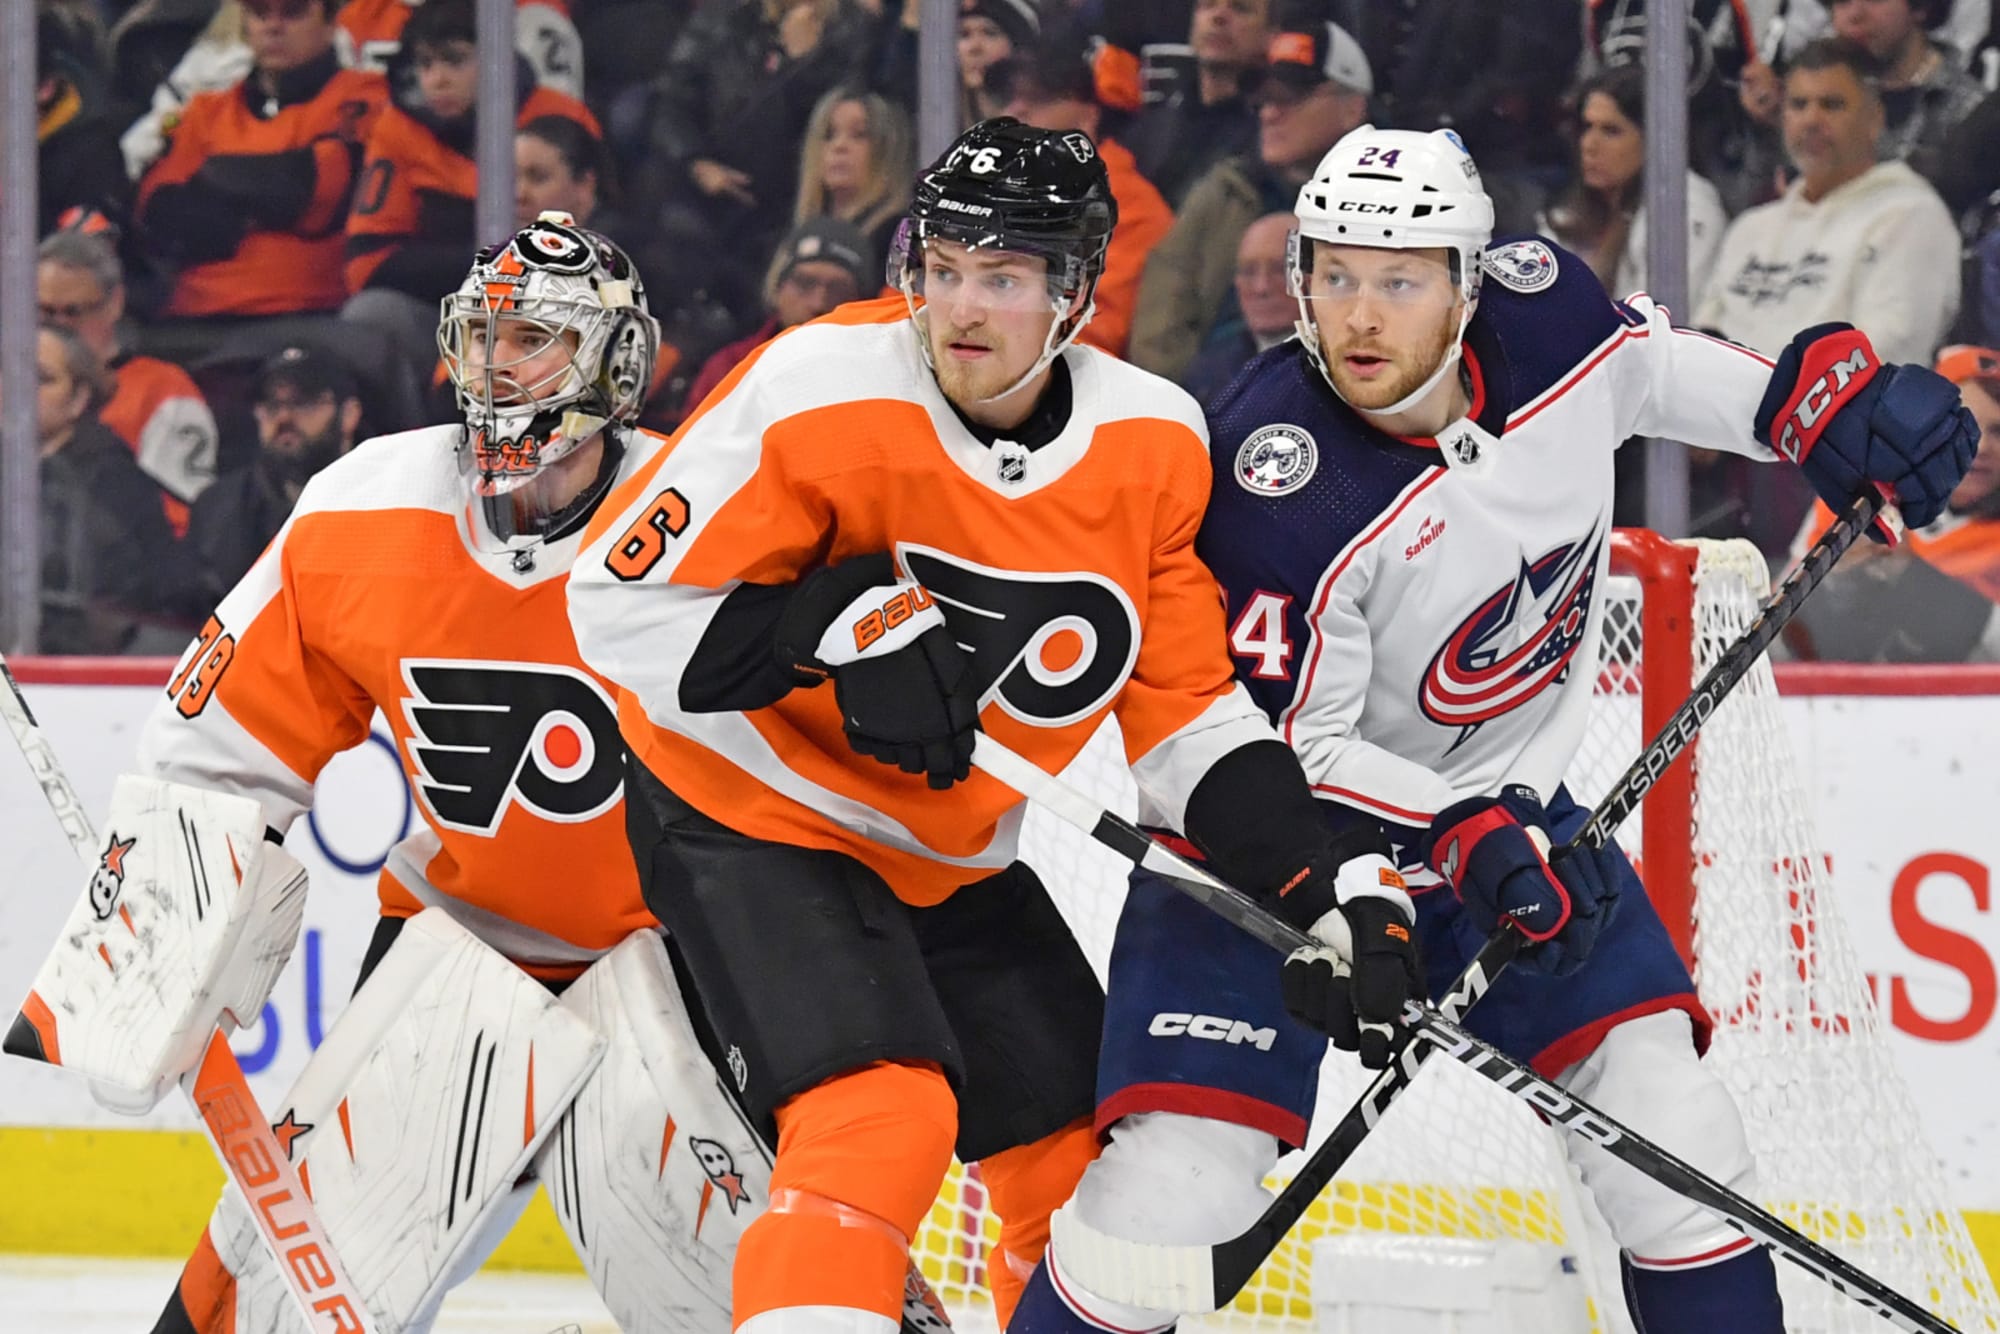 Flyers News: 8 Draft Picks Made on Day 2 - Sports Talk Philly